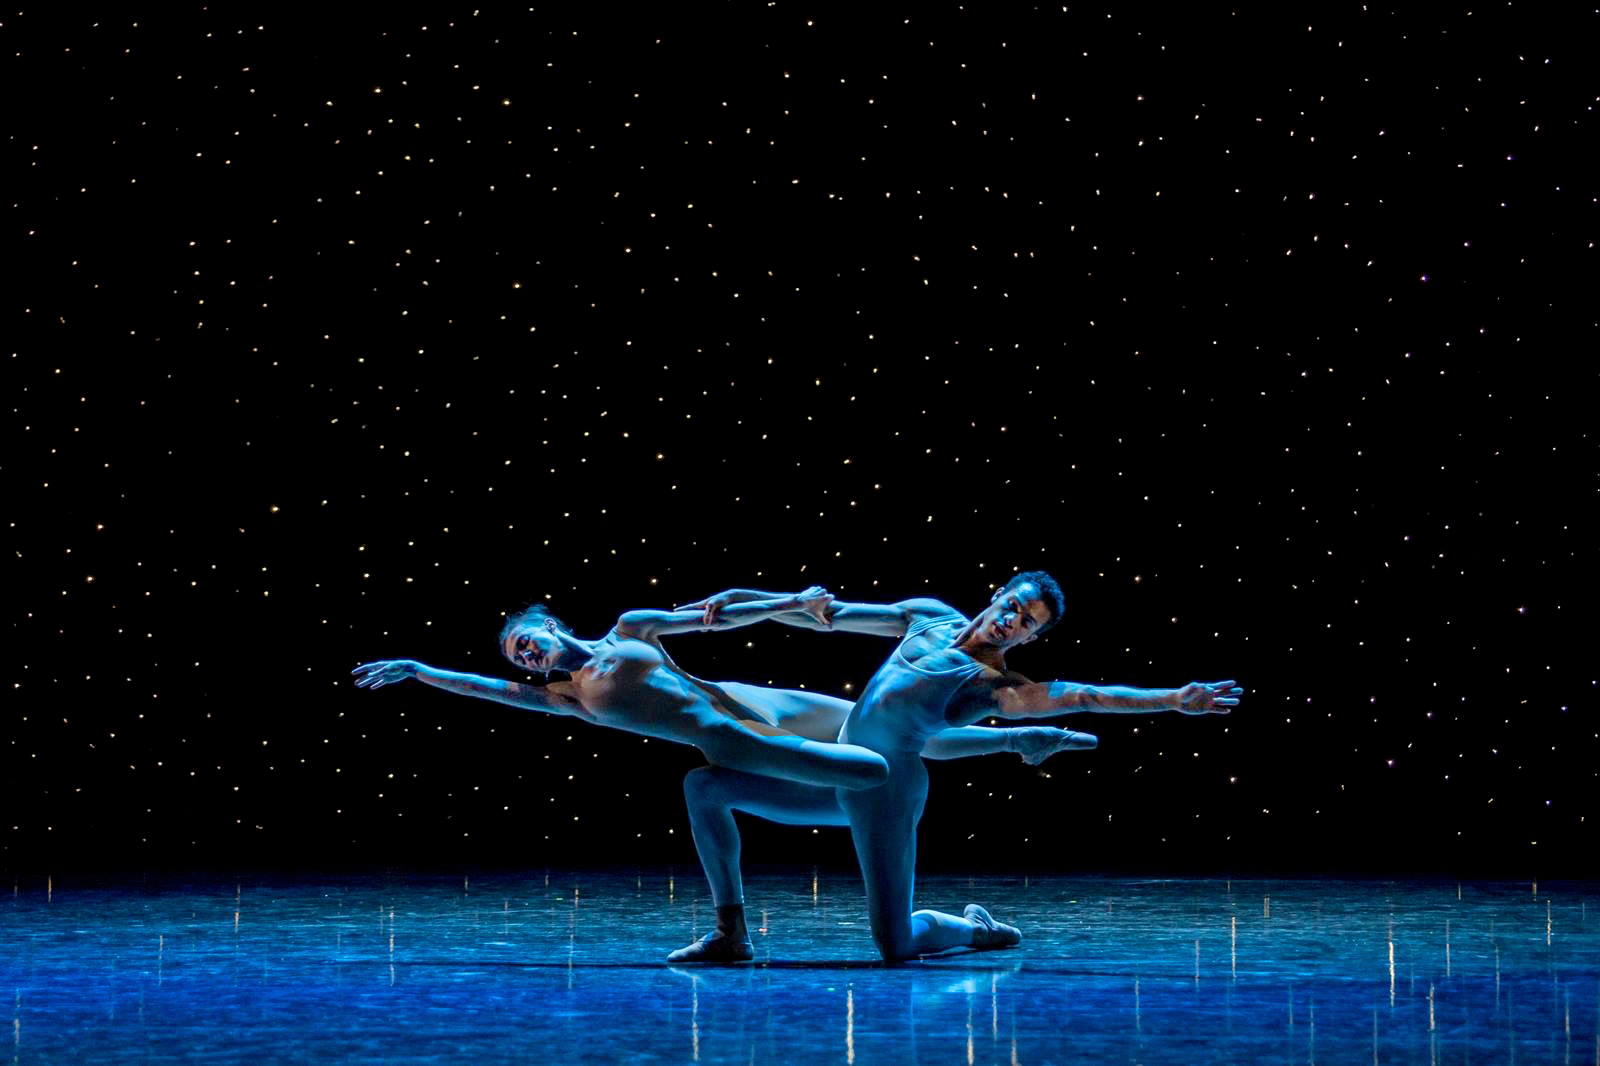 Adrian Blake Mitchell and Andrea Laššáková perform a pas de deux onstage, wearing blue unitards and dancing in front of a backdrop of a starry night sky. Mitchell kneels on his left knee and leans his body back and to the left as Laššáková lays across his right thigh, holding onto his right arm with her left and stretching her body long.